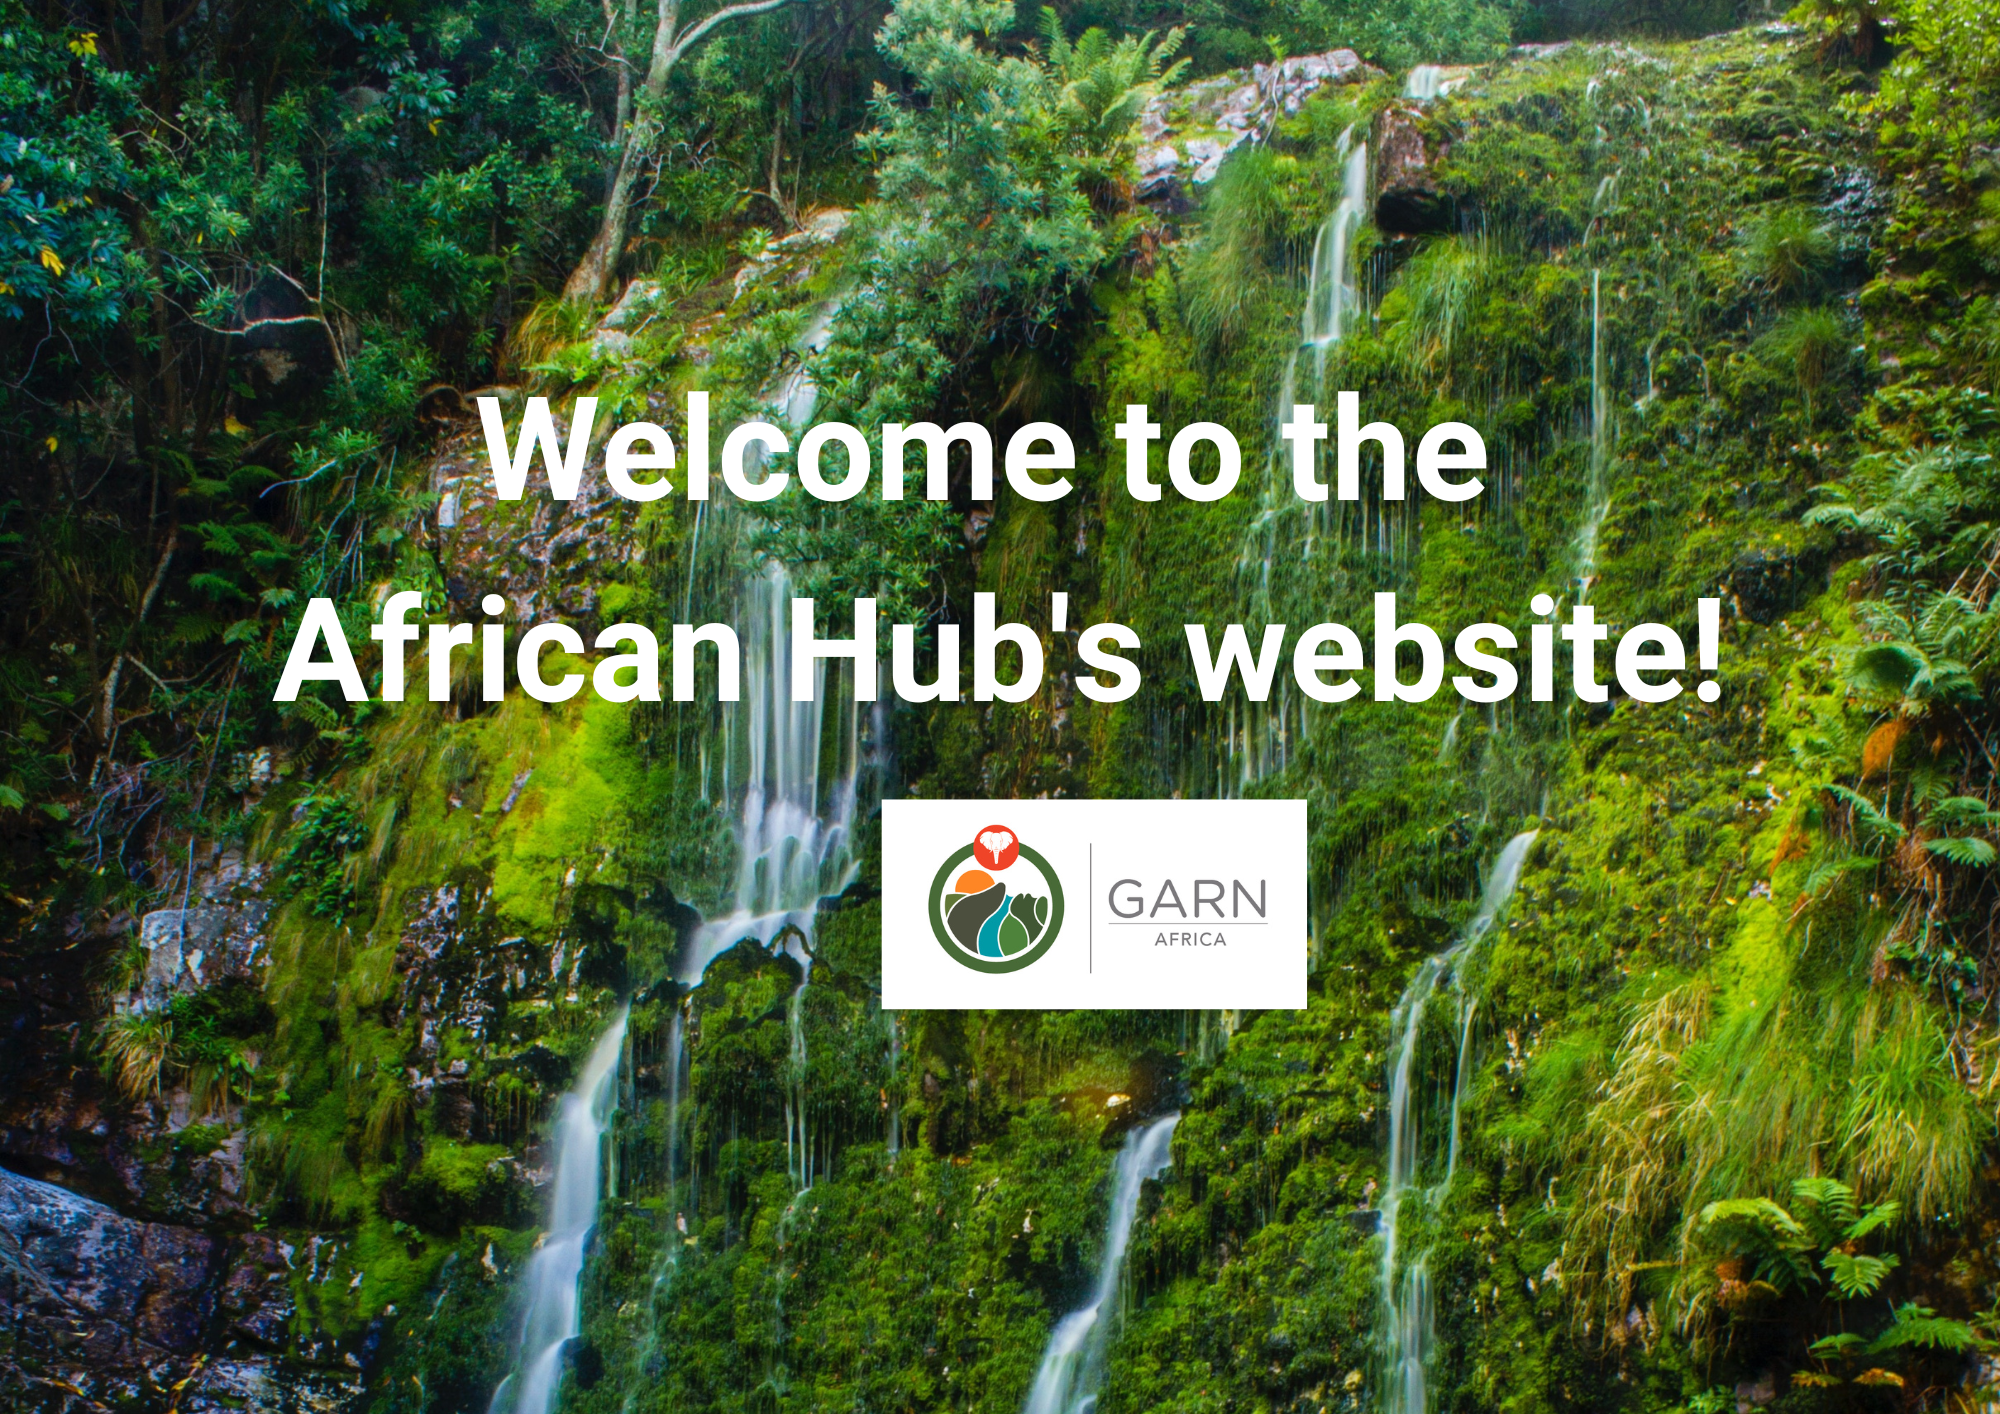 Launch of the African Hub website!